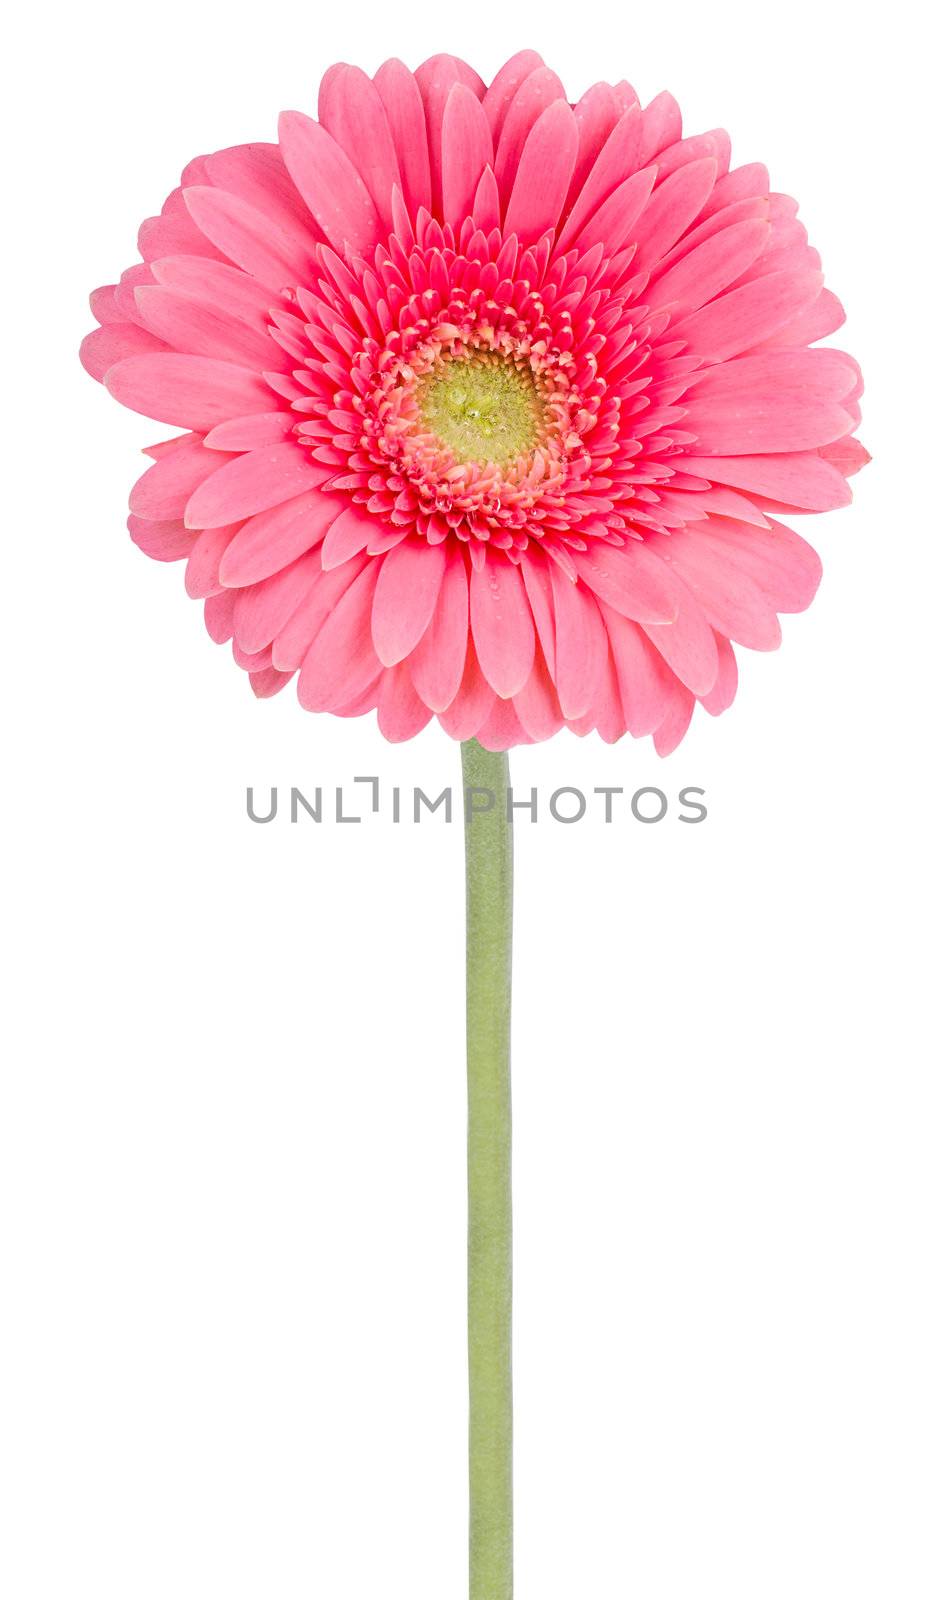 close-up pink gerbera flower, isolated on white